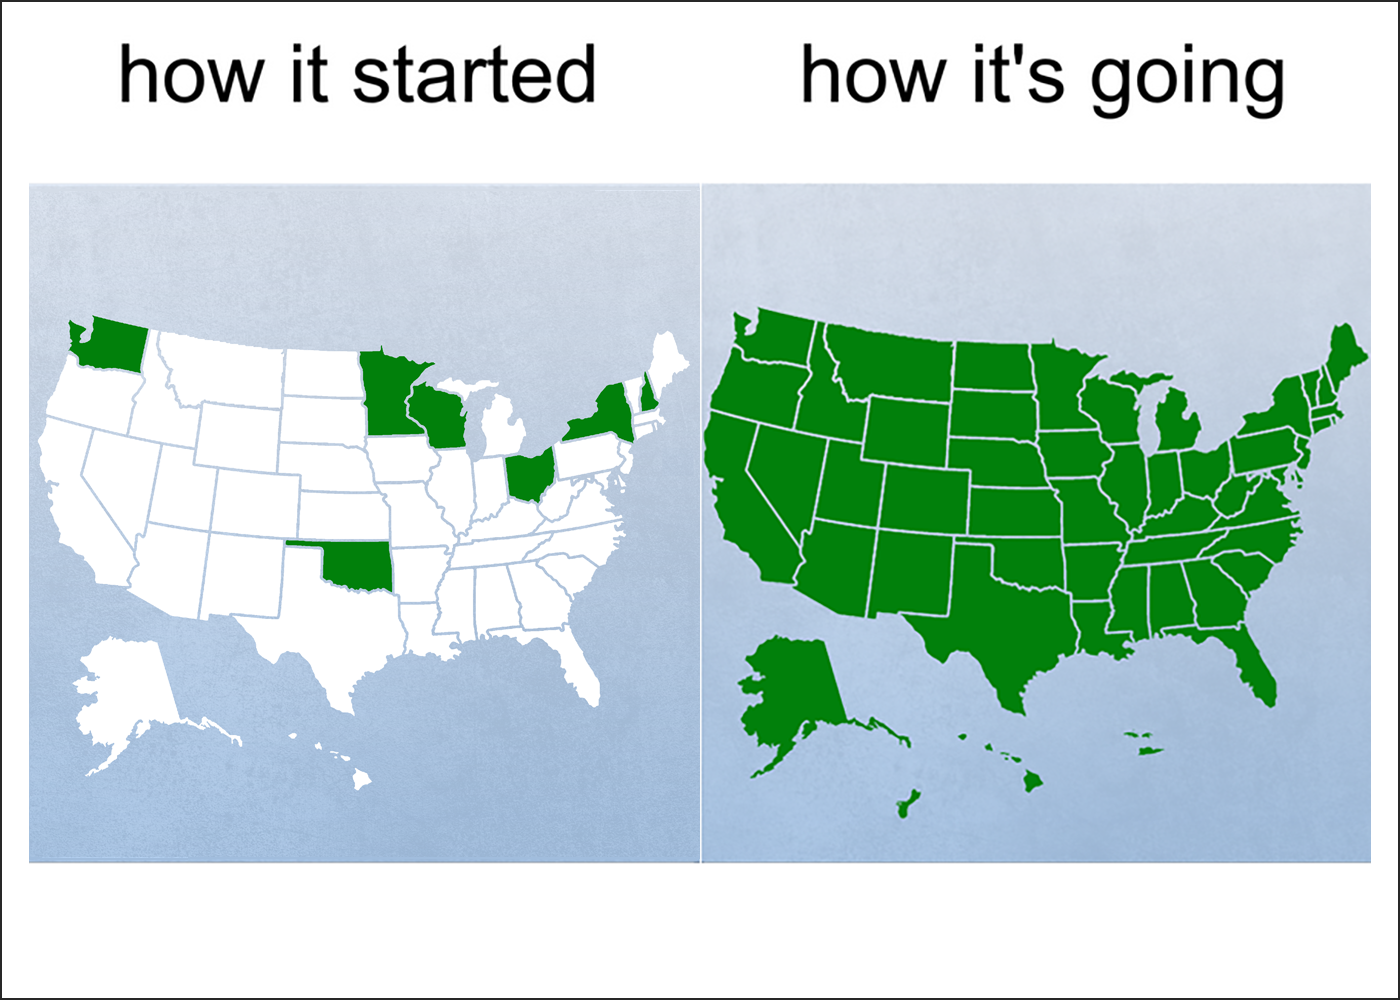 how it started with a map of the US and seven states are colored green: Washington, Oklahoma, Minnesota, Wisconsin, Ohio, New York, New Hampshire; how's it going with all 50 states filled in green